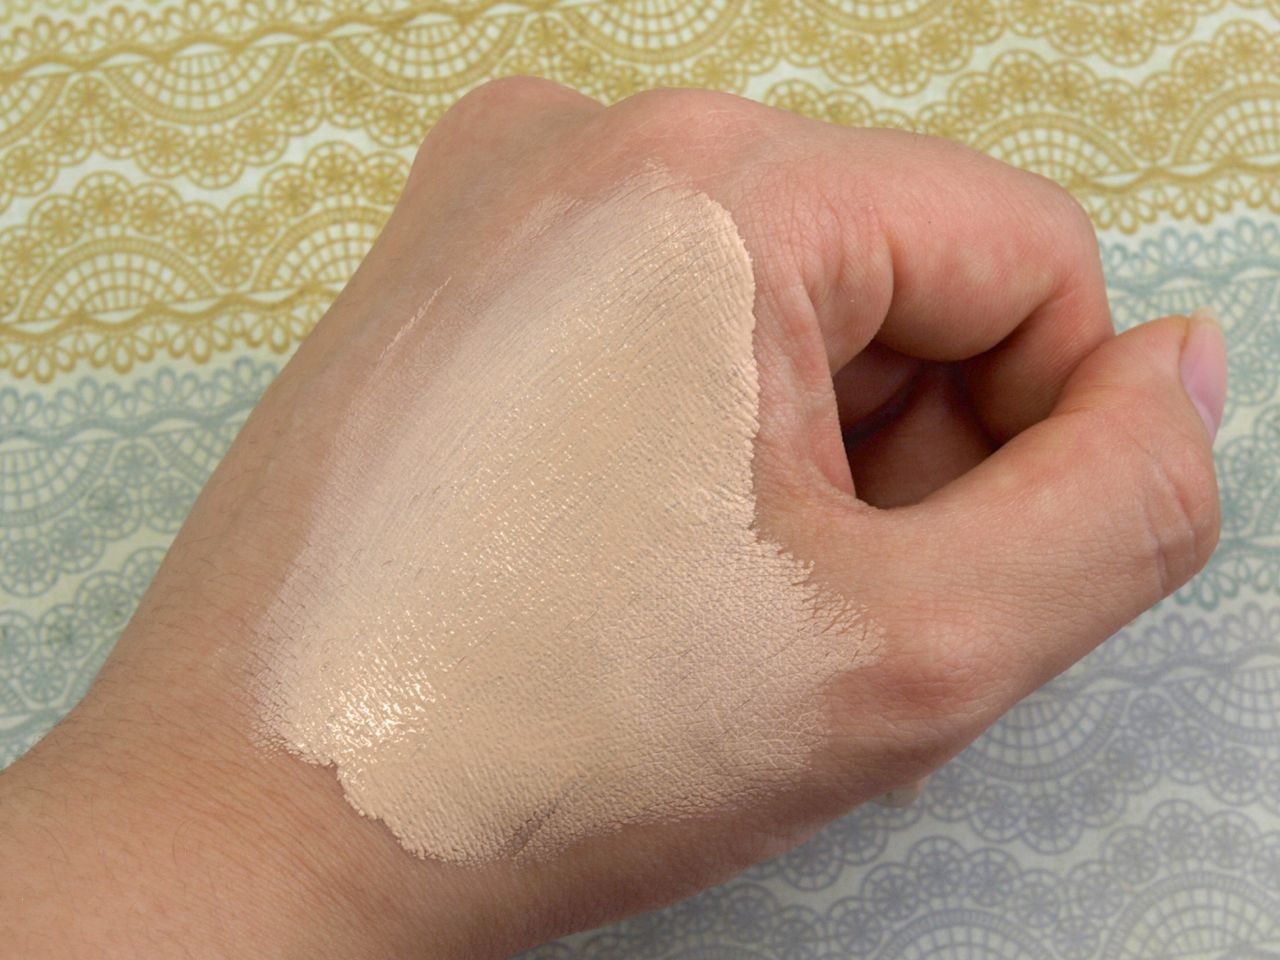 Cirkus mikroskopisk Regn Kat Von D Lock-It Tattoo Foundation in "Light 45": Review and Swatches |  The Happy Sloths: Beauty, Makeup, and Skincare Blog with Reviews and  Swatches